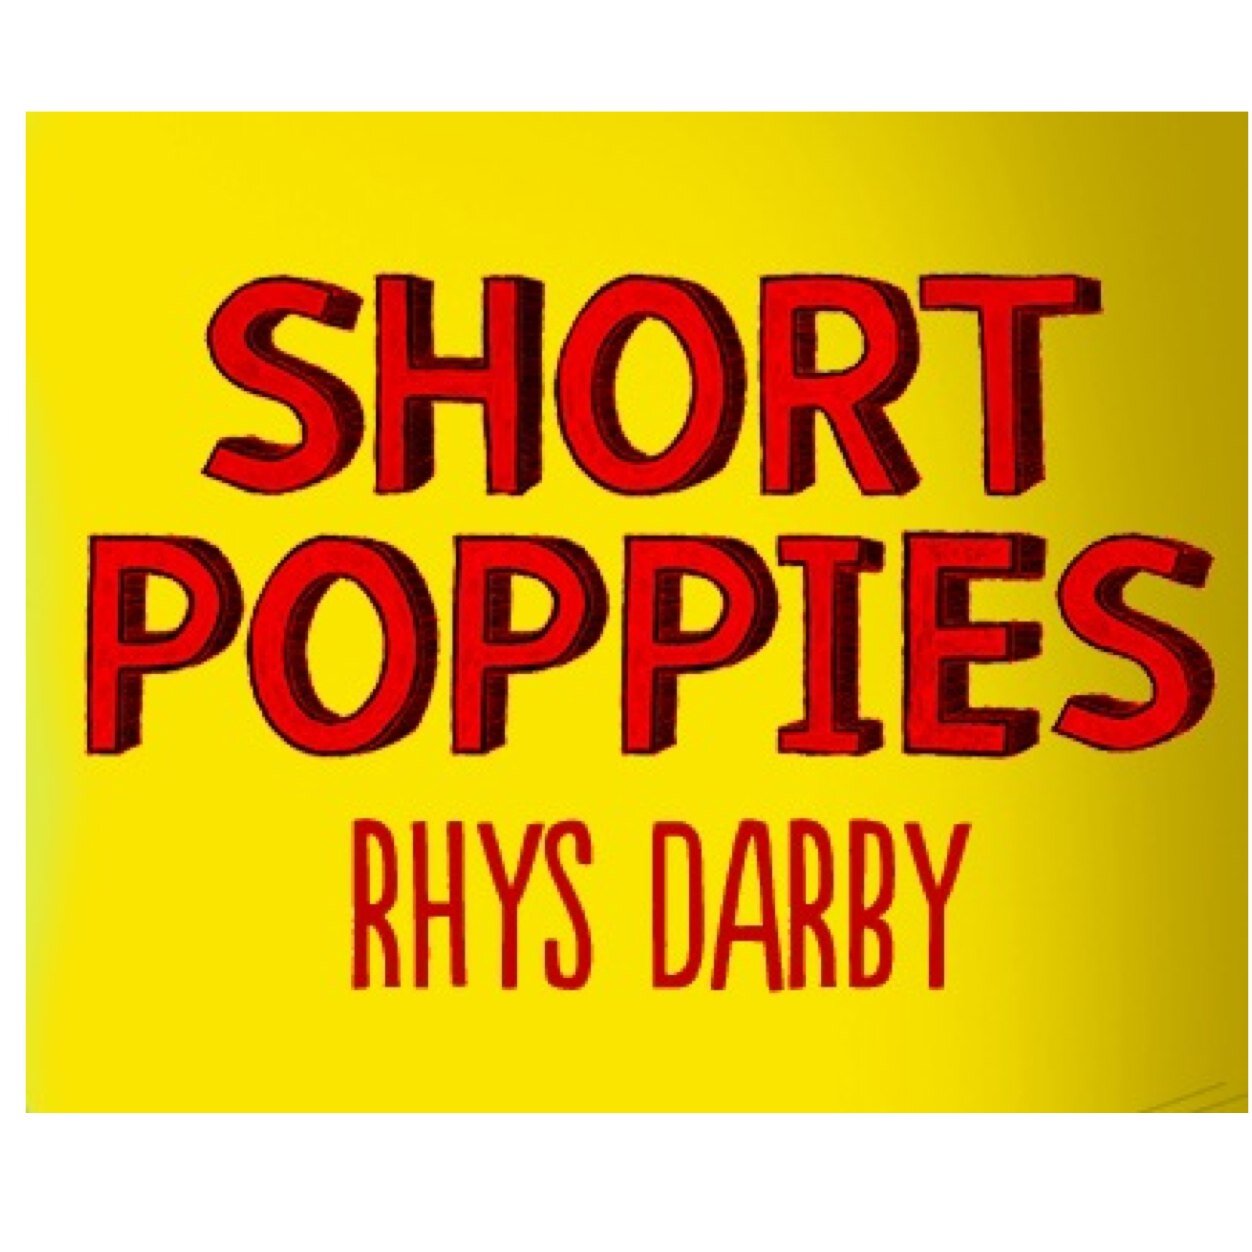 A comedy series written by Rhys Darby. 
#onlythepos